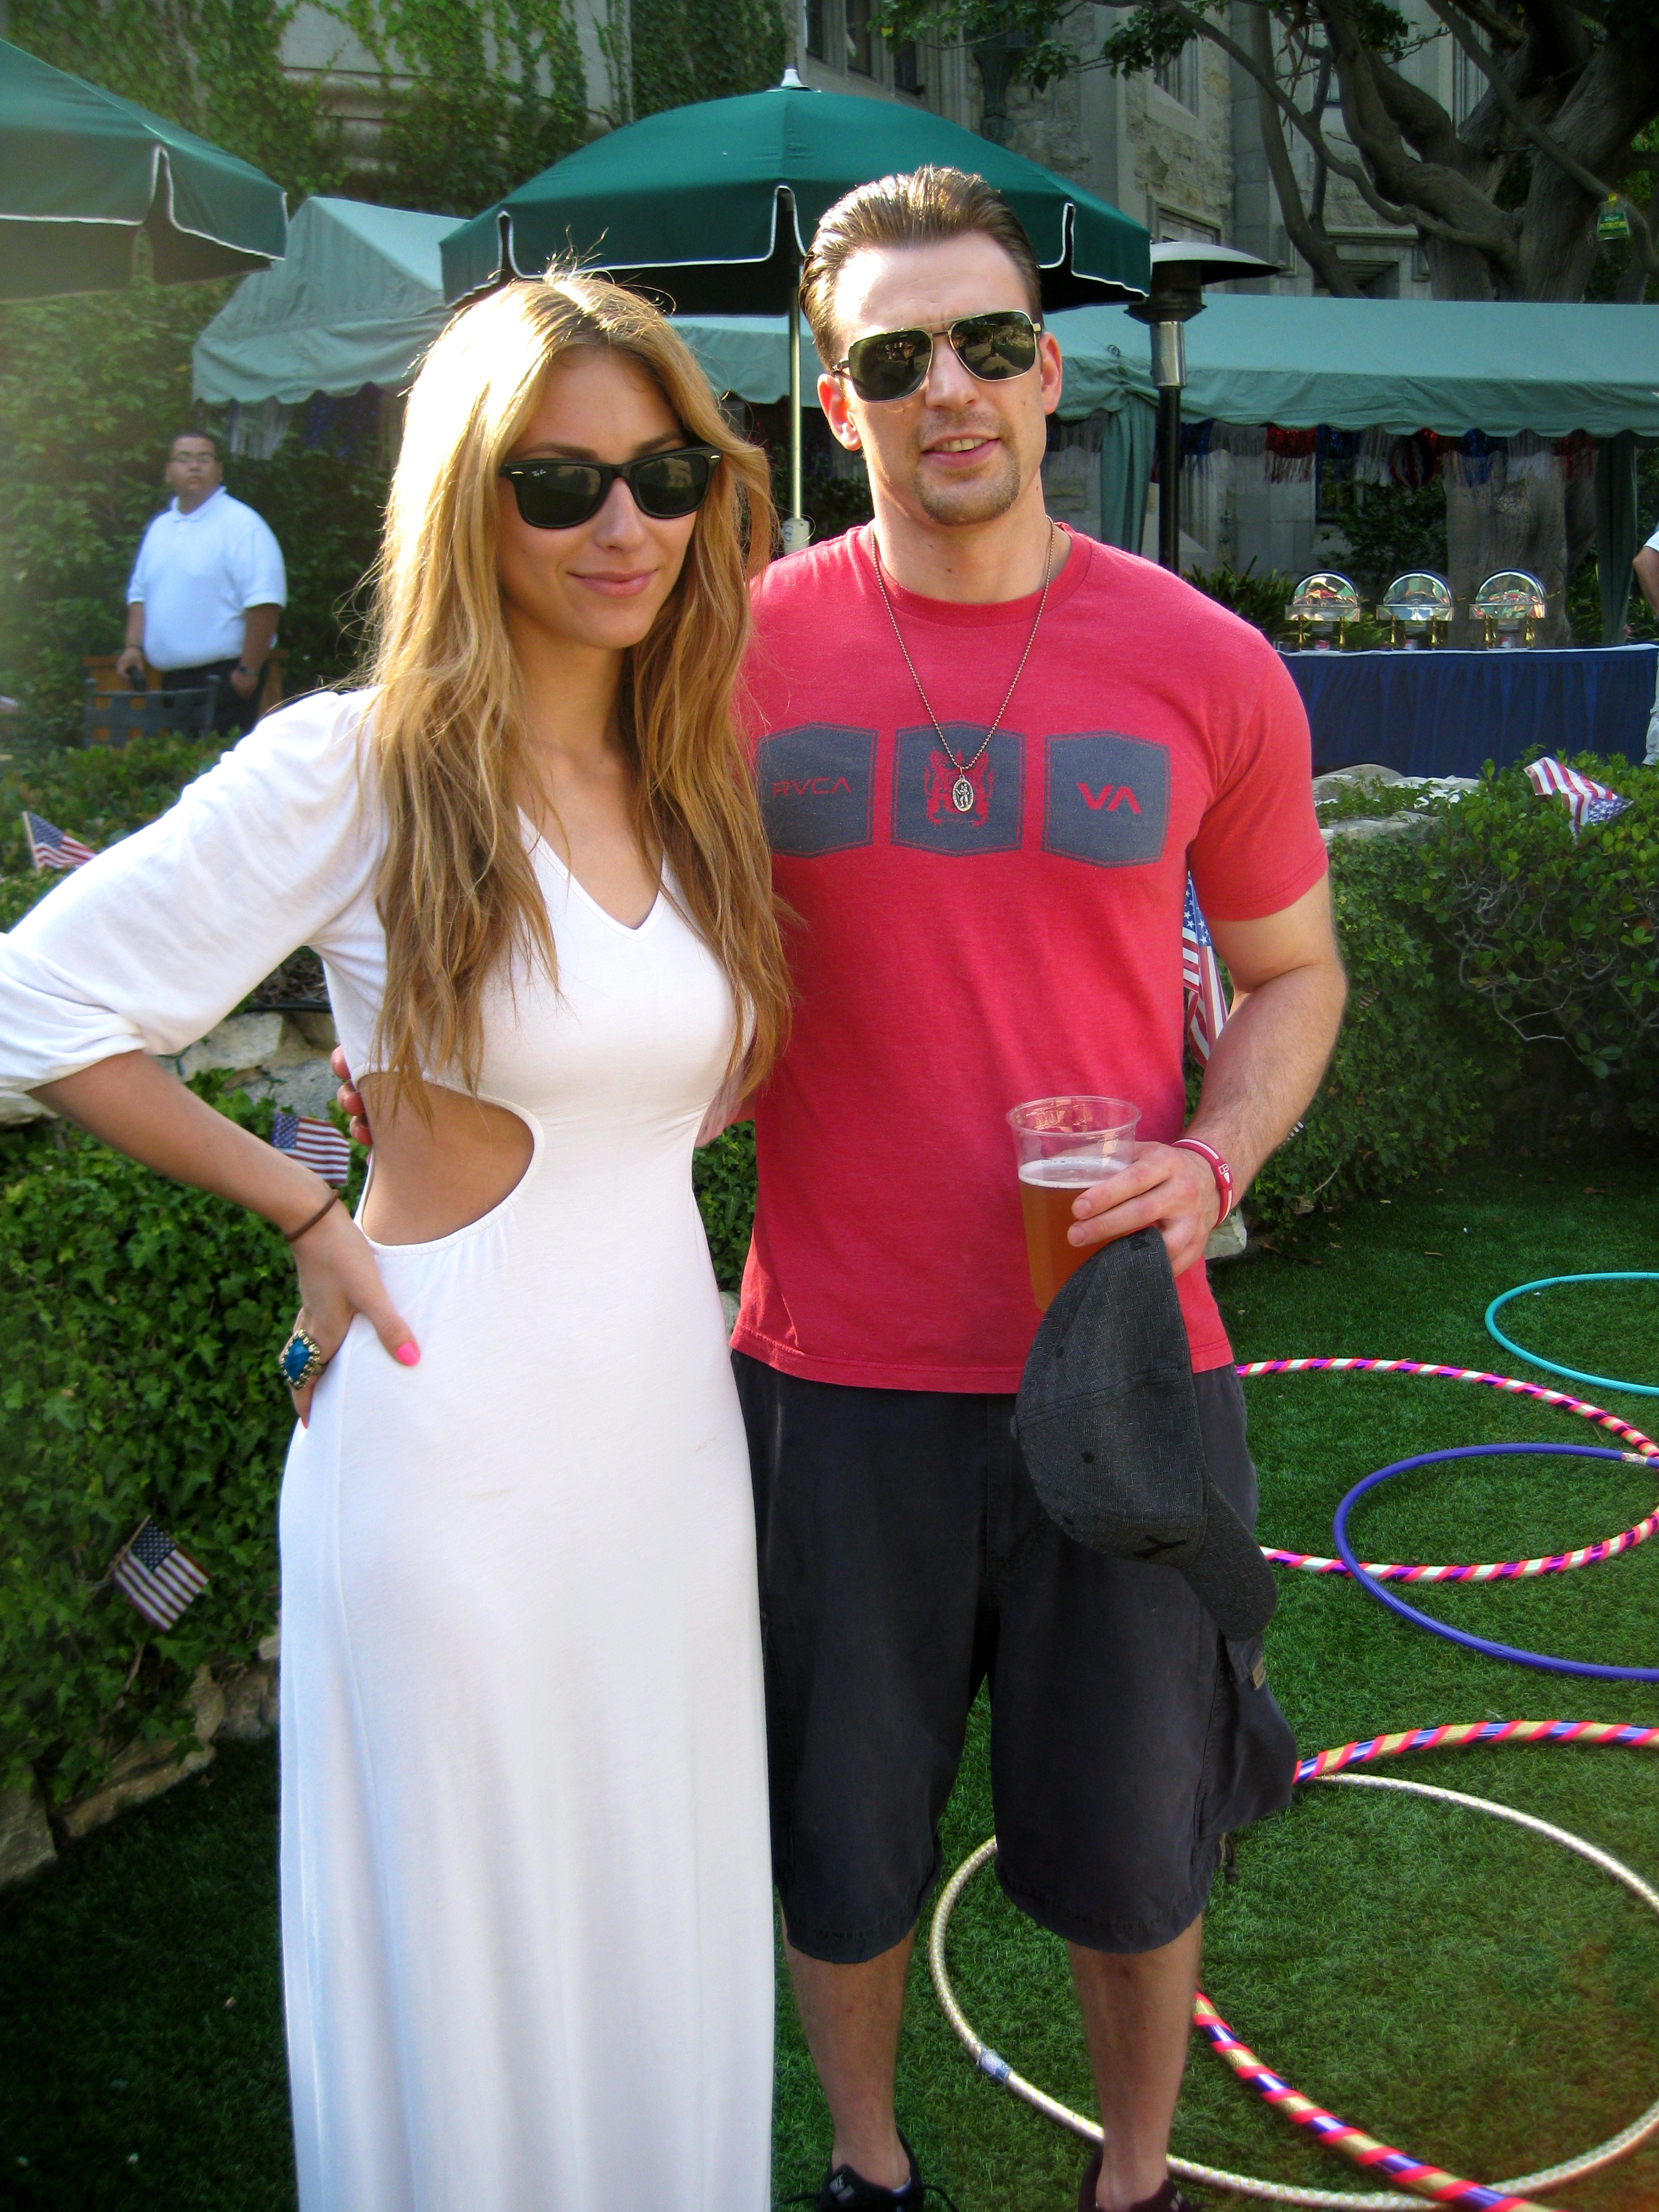 Cody Kennedy & Chris Evans attend the Playboy Mansion July 4th, 2011